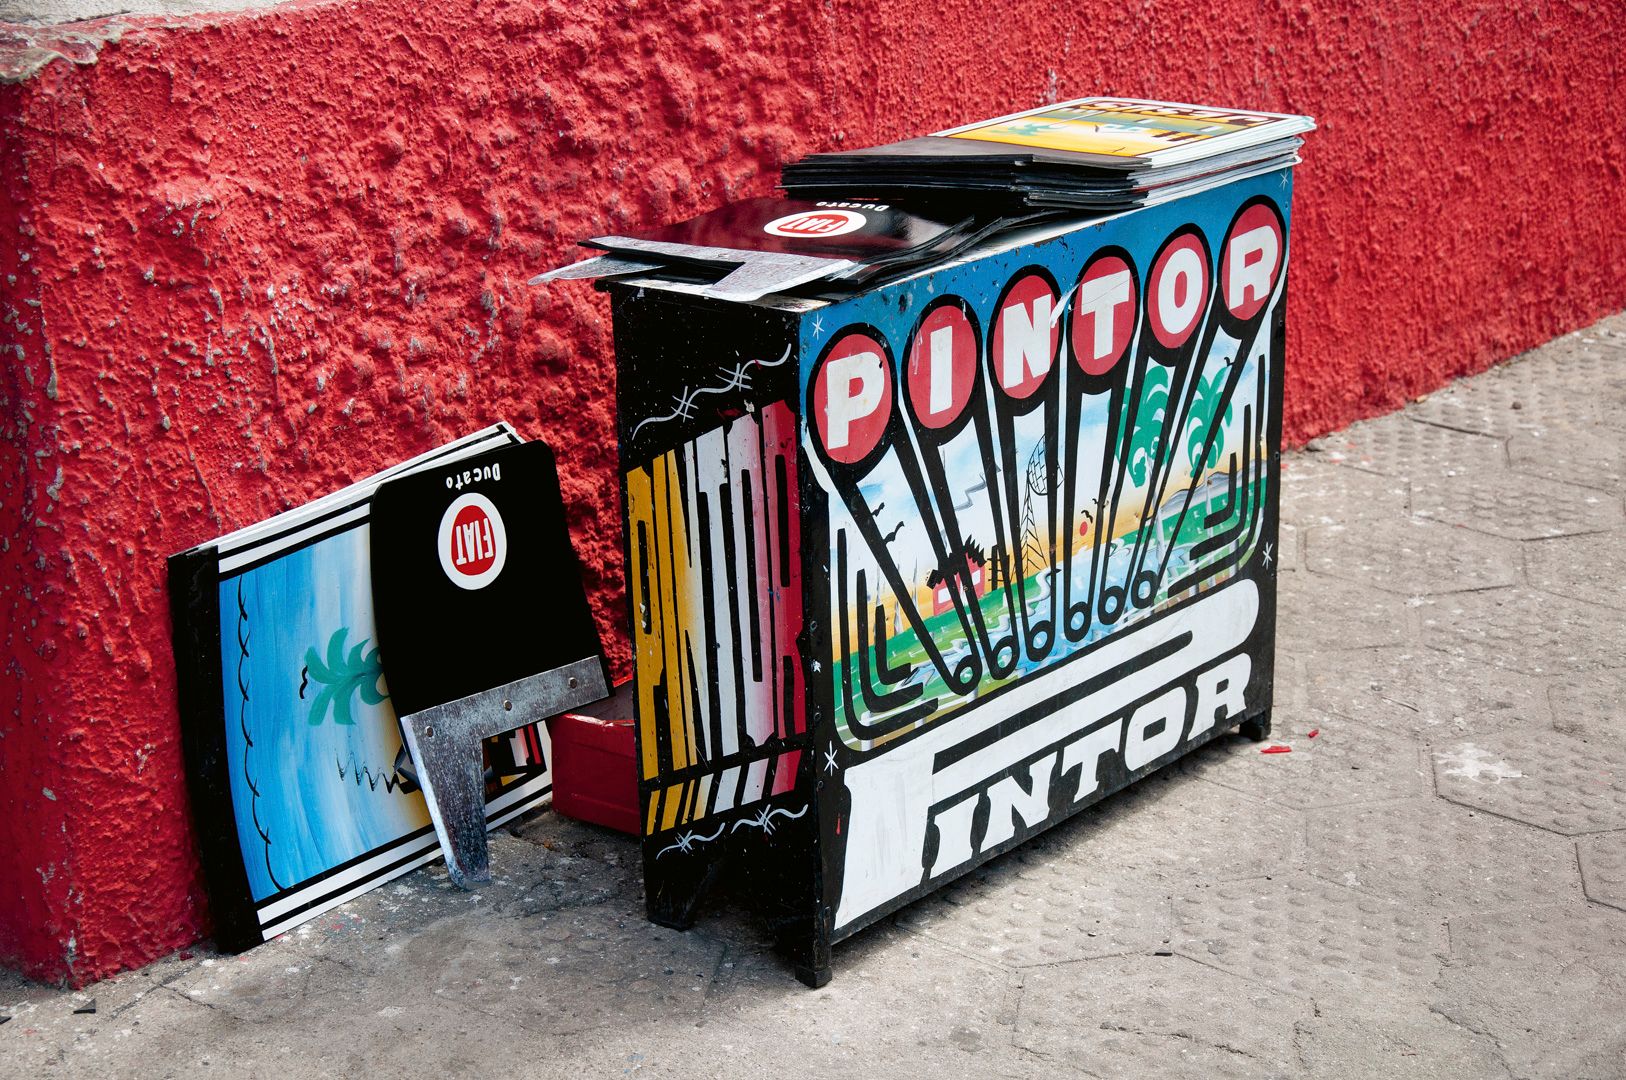 Box decorated with illustrations and lettering of the word "pintor".